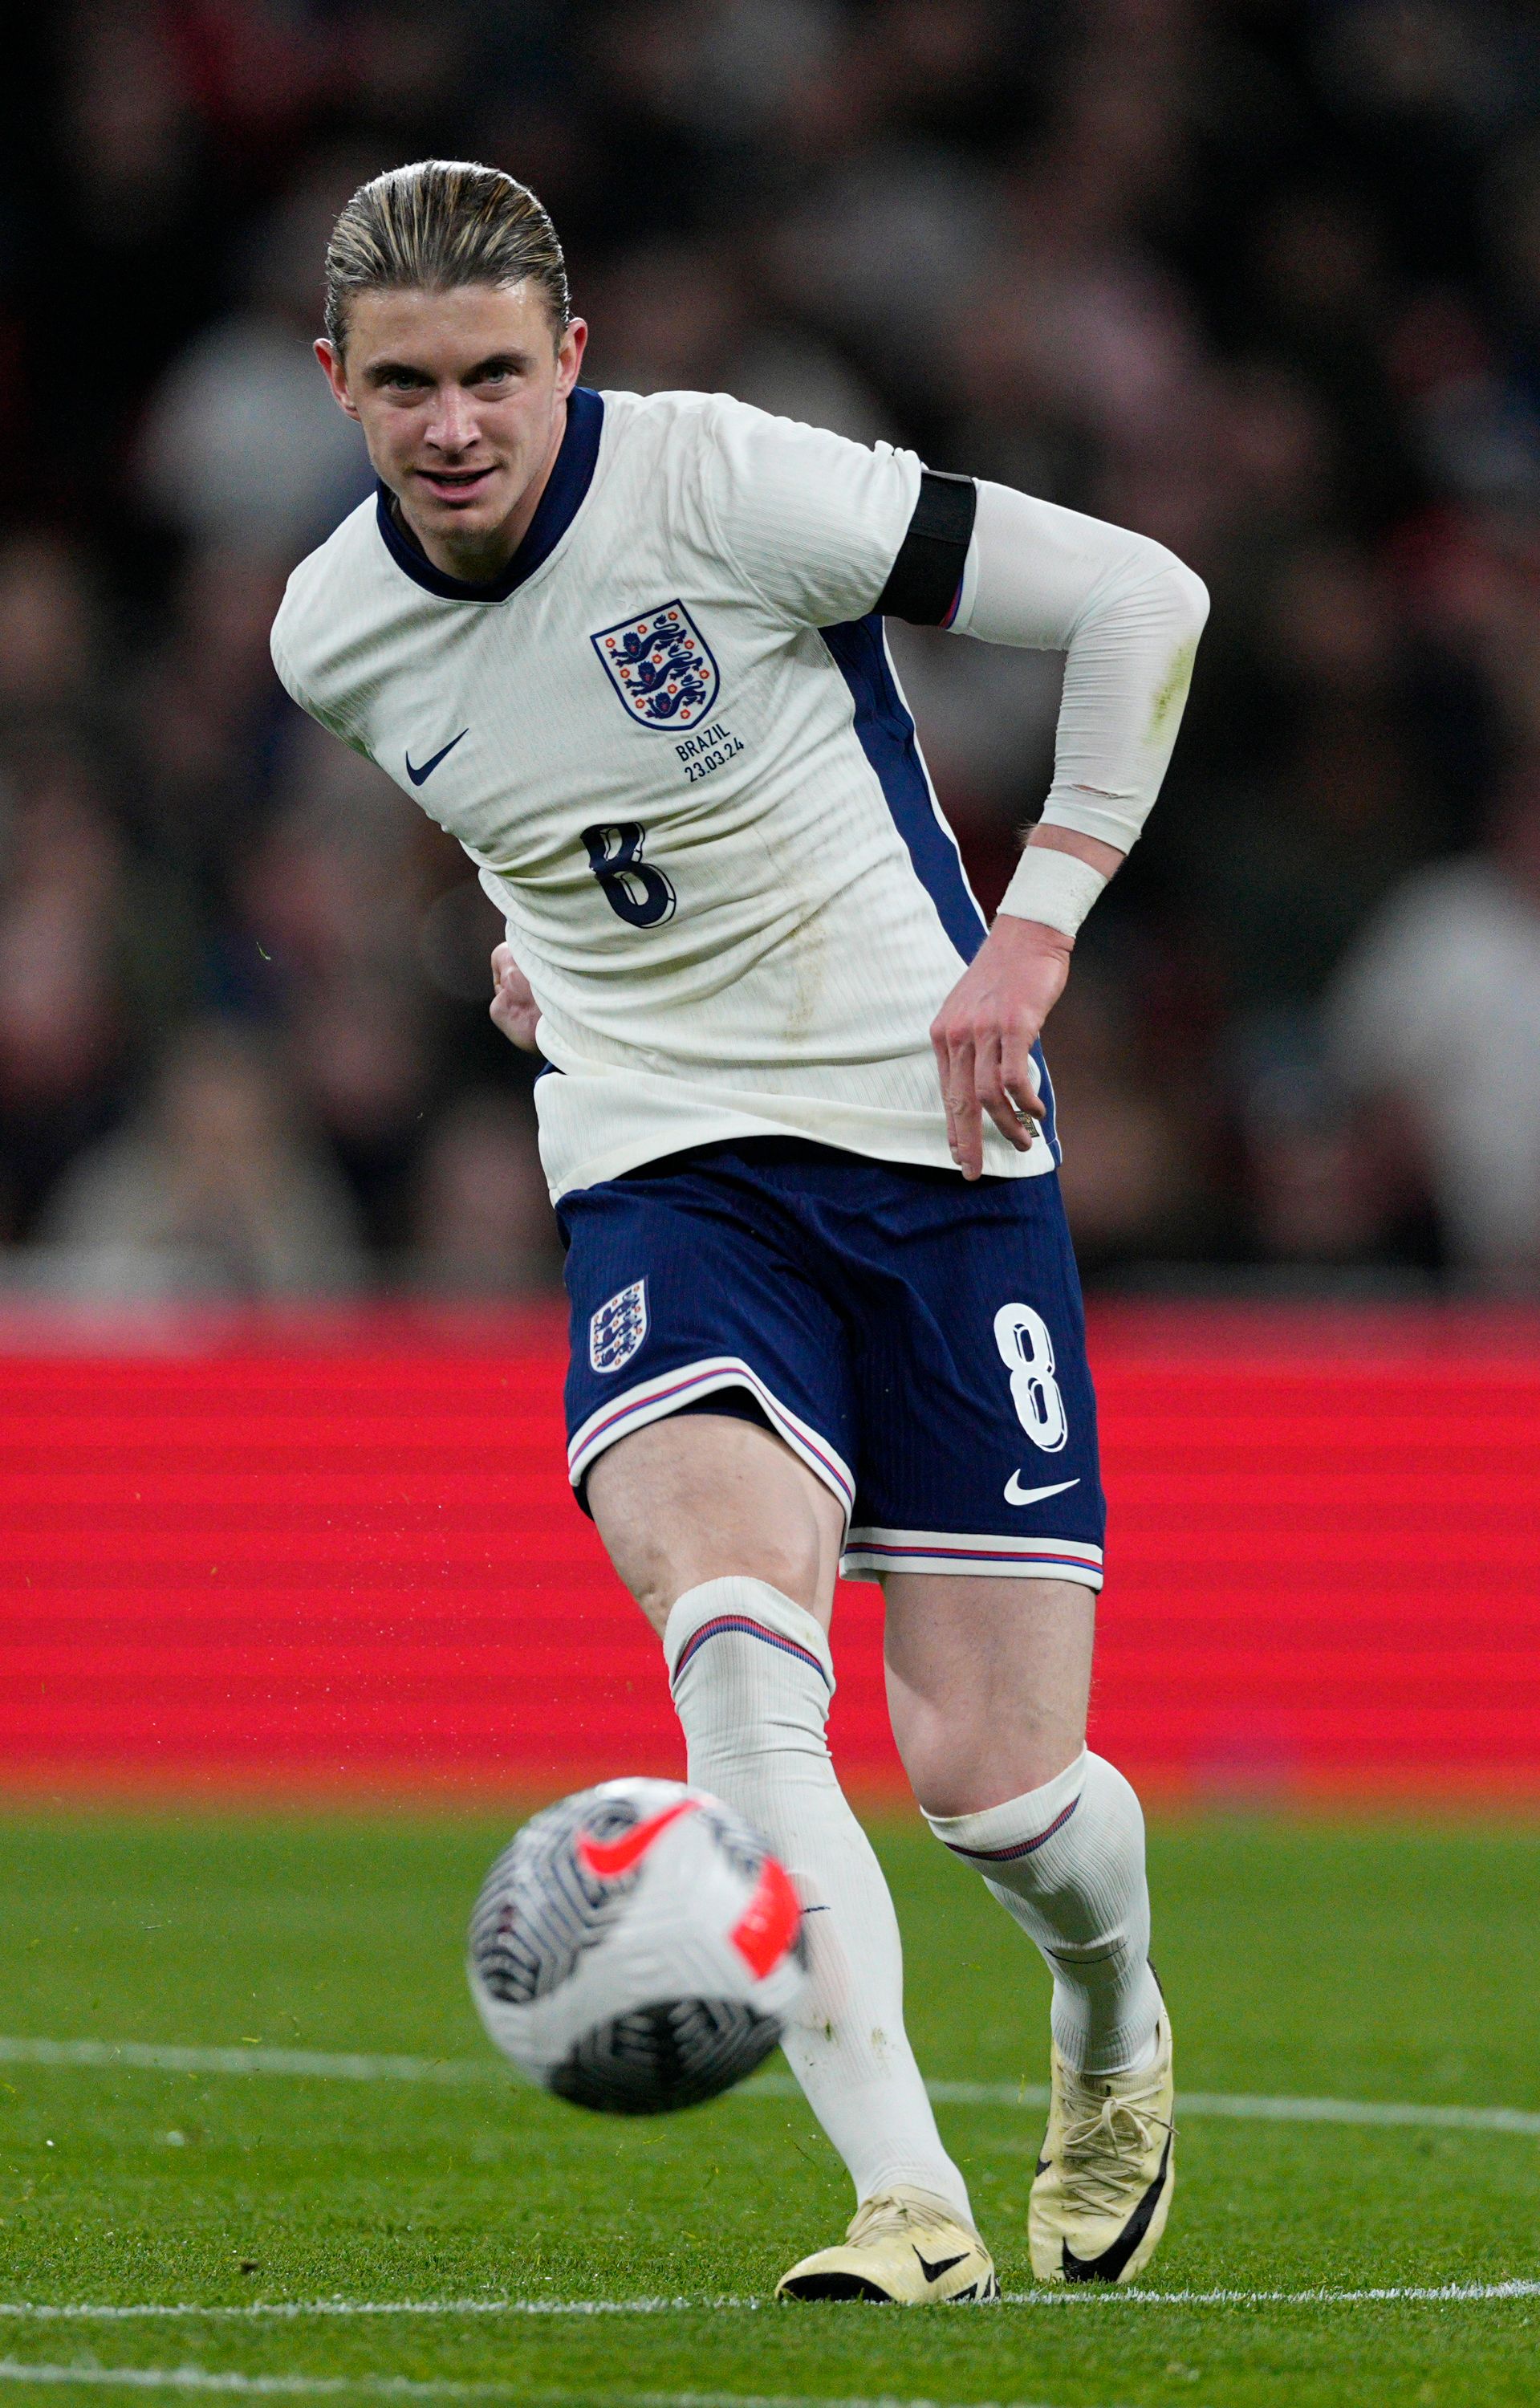 Gallagher has been one of Chelsea's best players this season and earned an England call-up